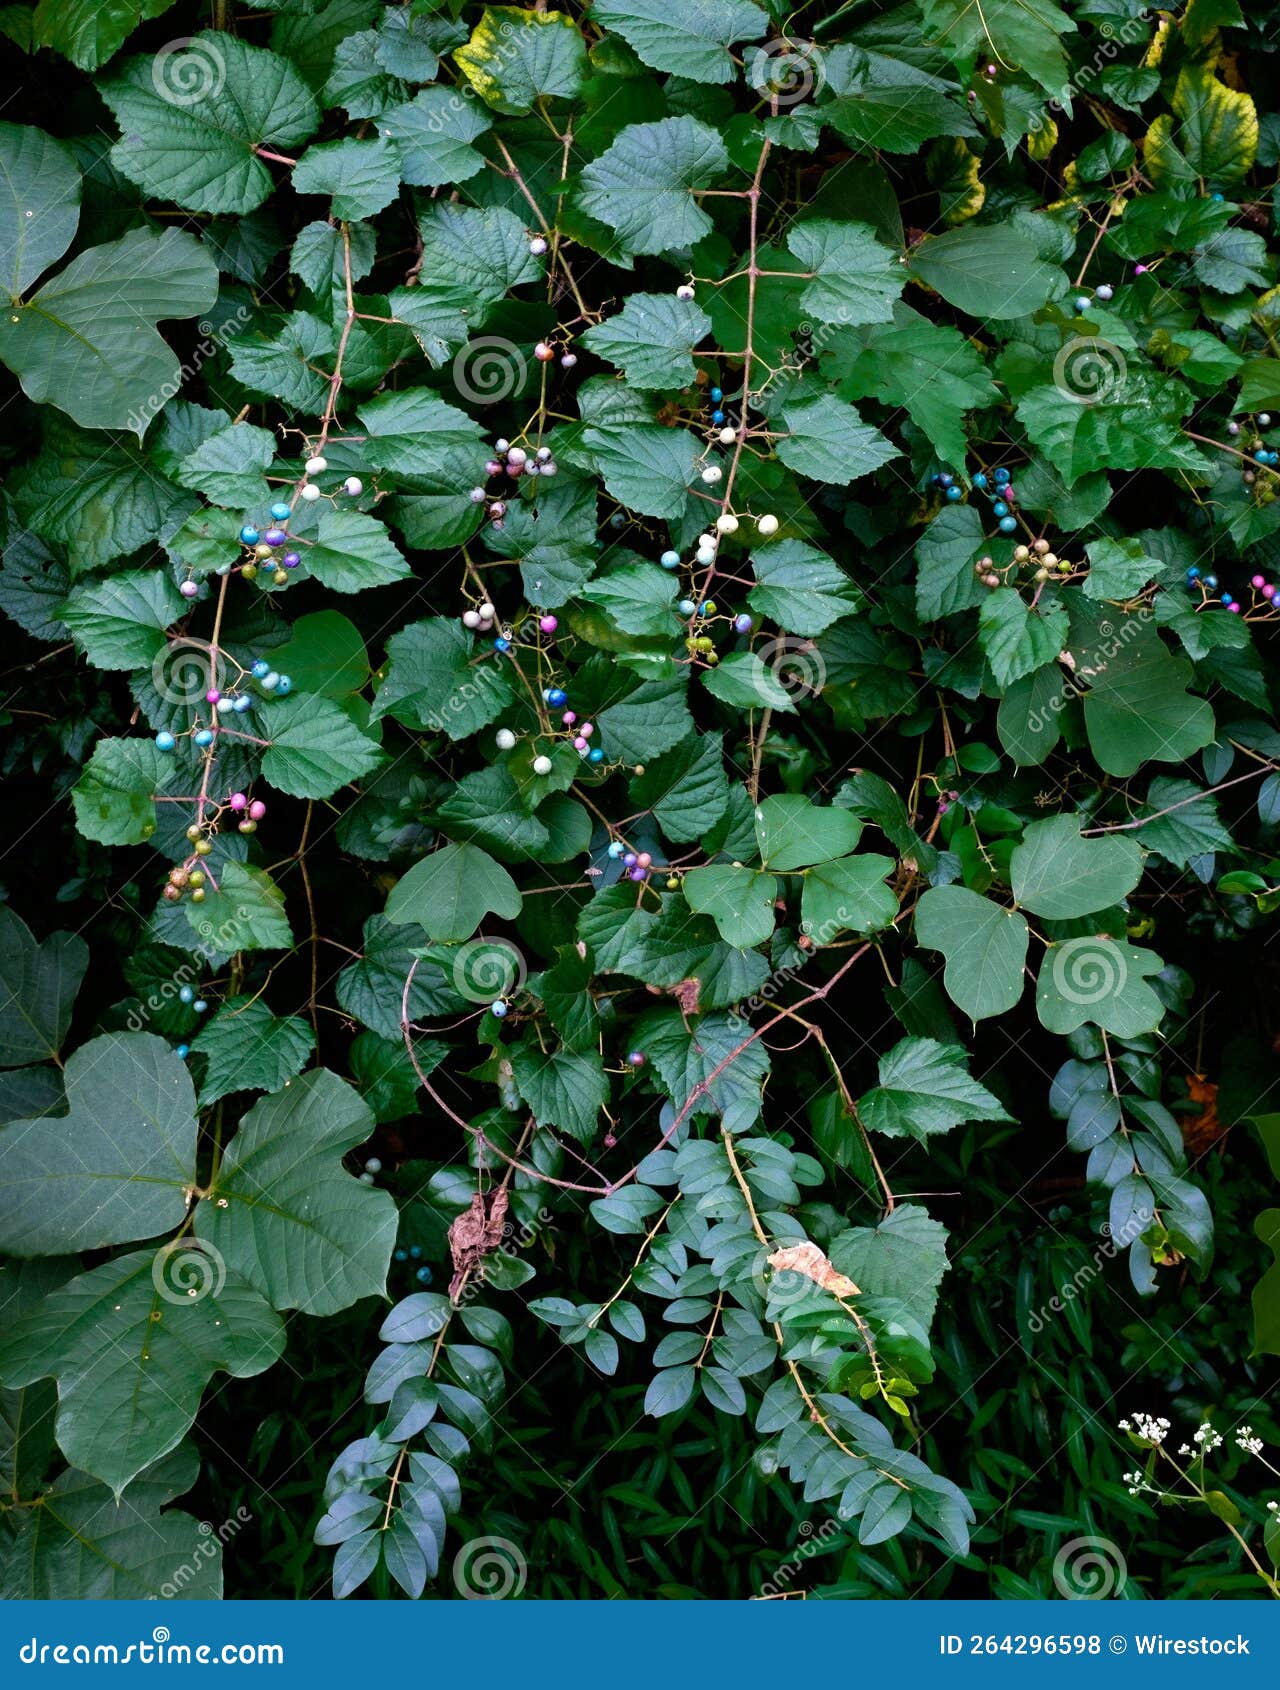 closep of lush plants with blue and purple berries